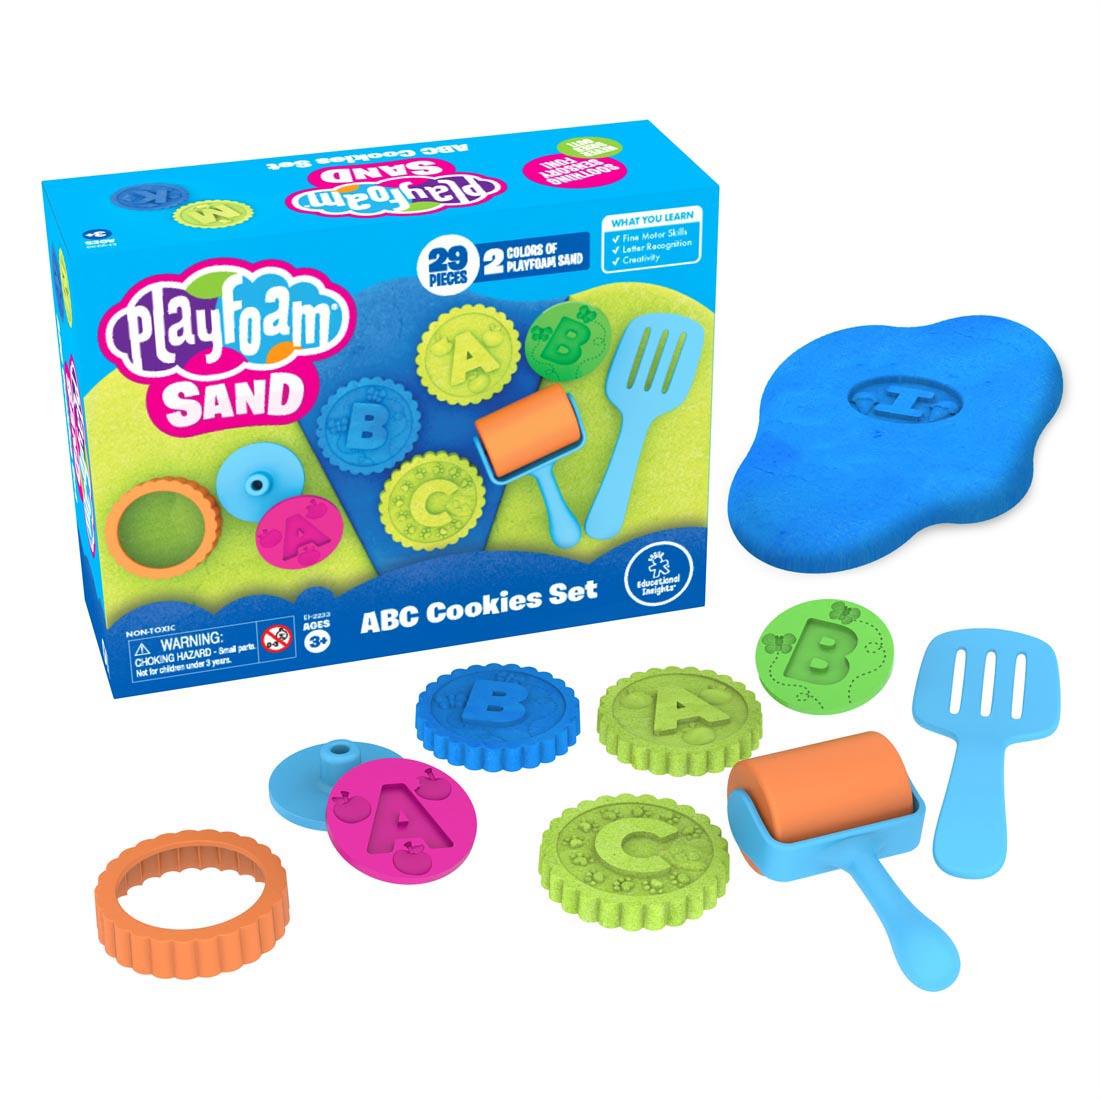 Playfoam Sand ABC Cookies Set By Educational Insights with tools shown outside the box